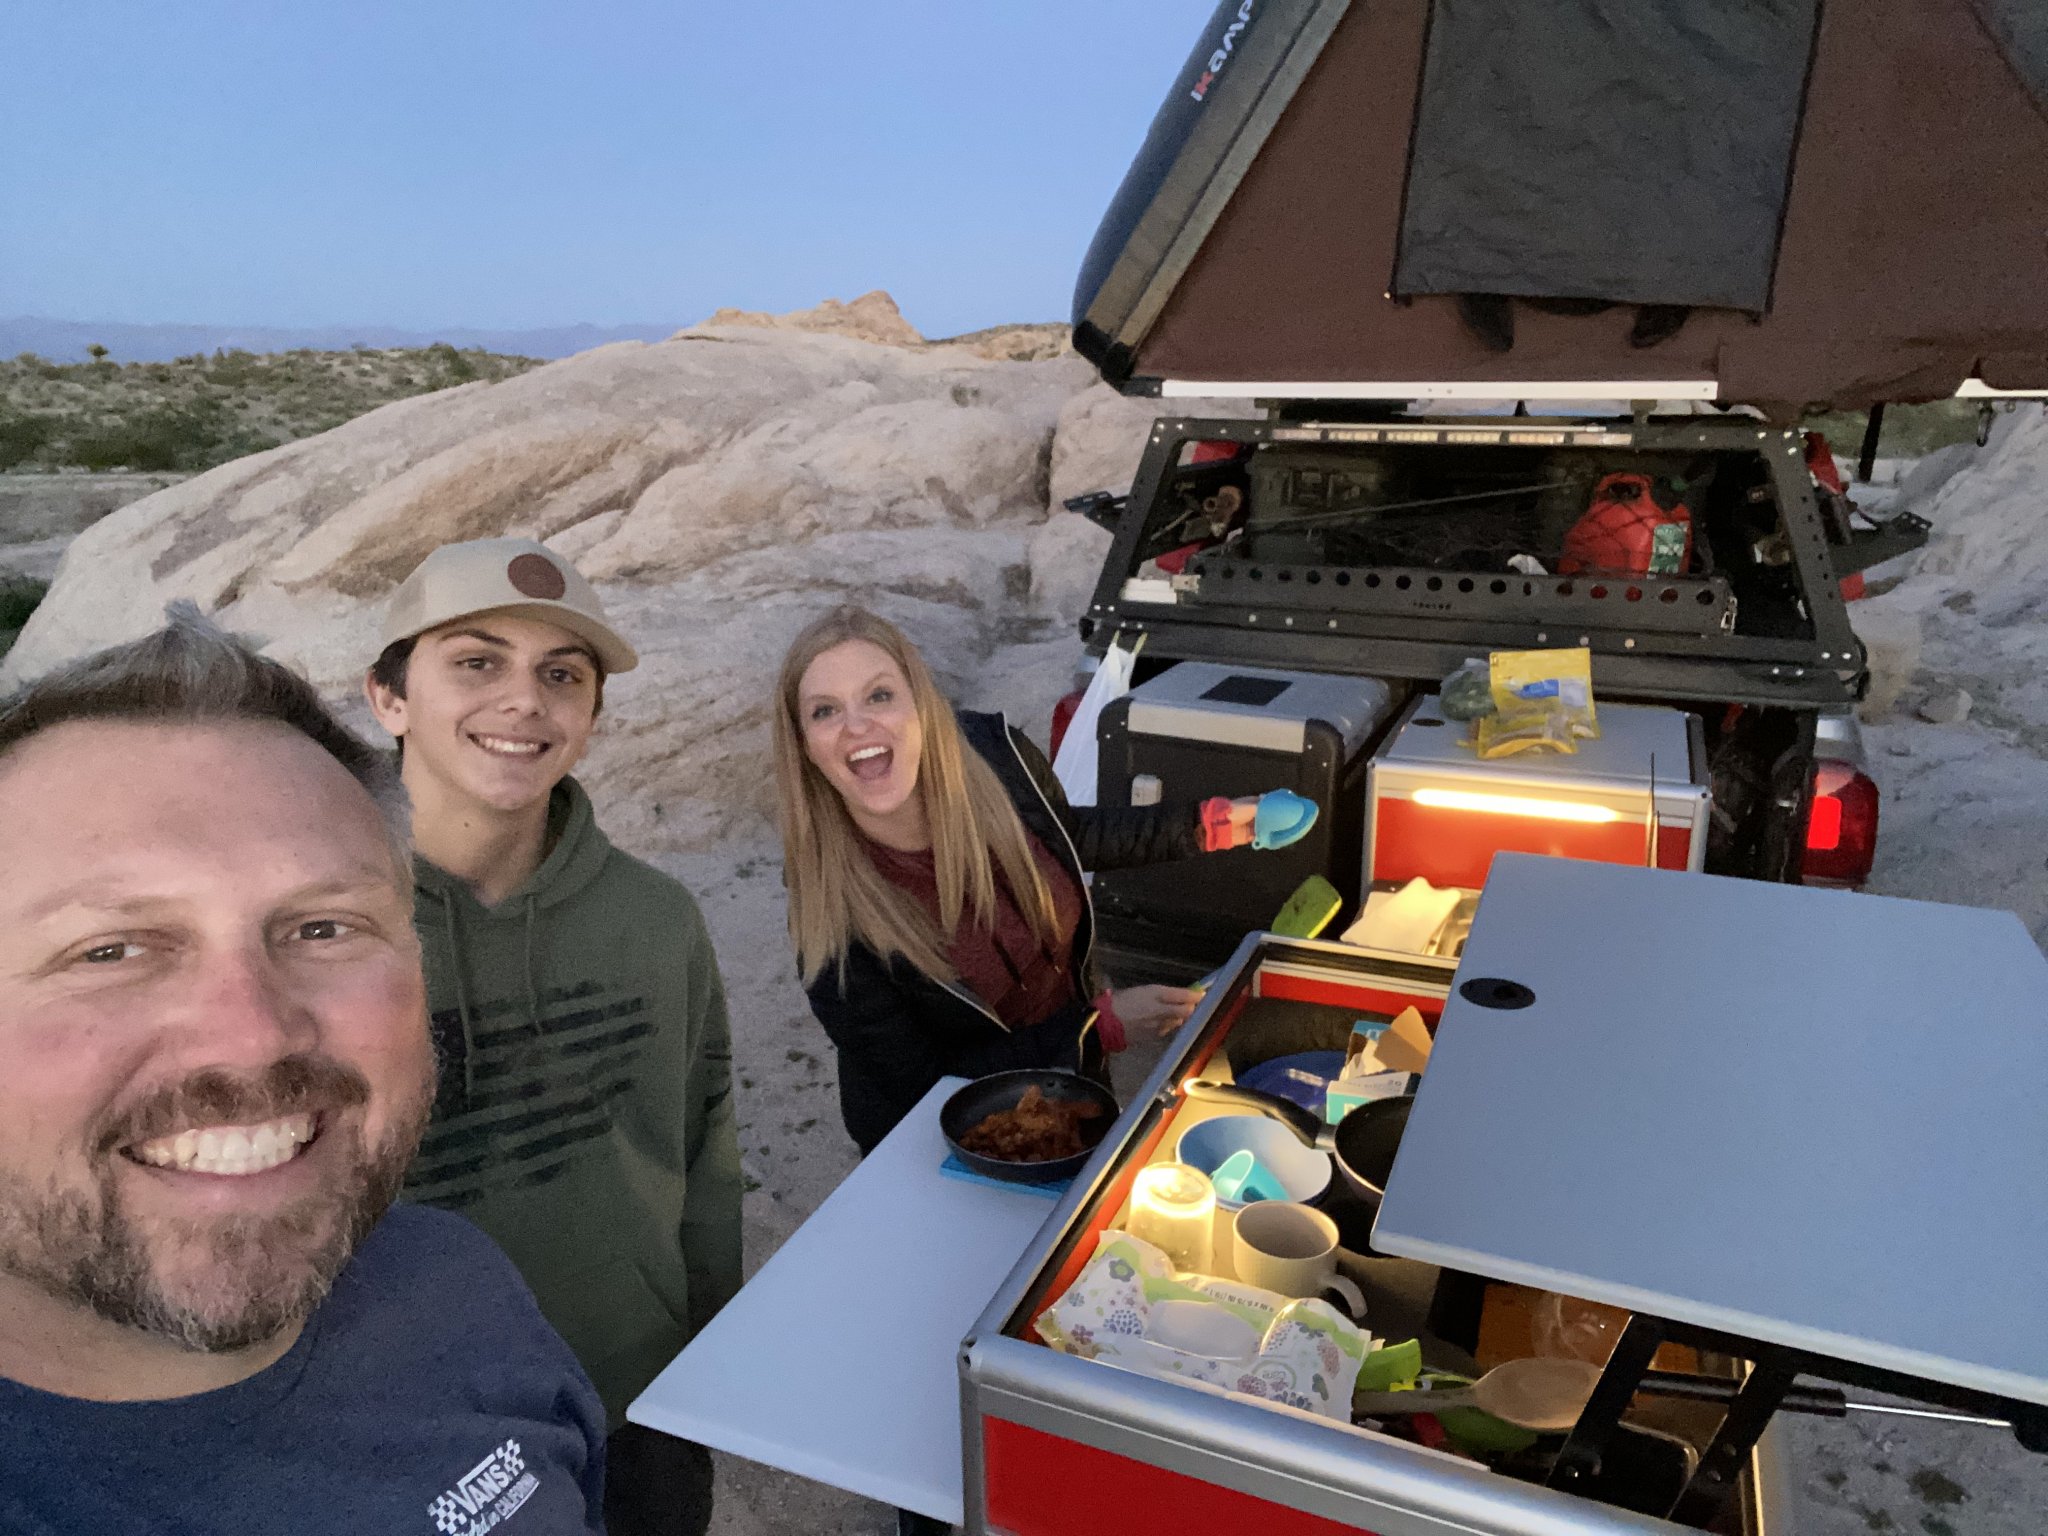 Dave Addington with his family while camping in the desert.